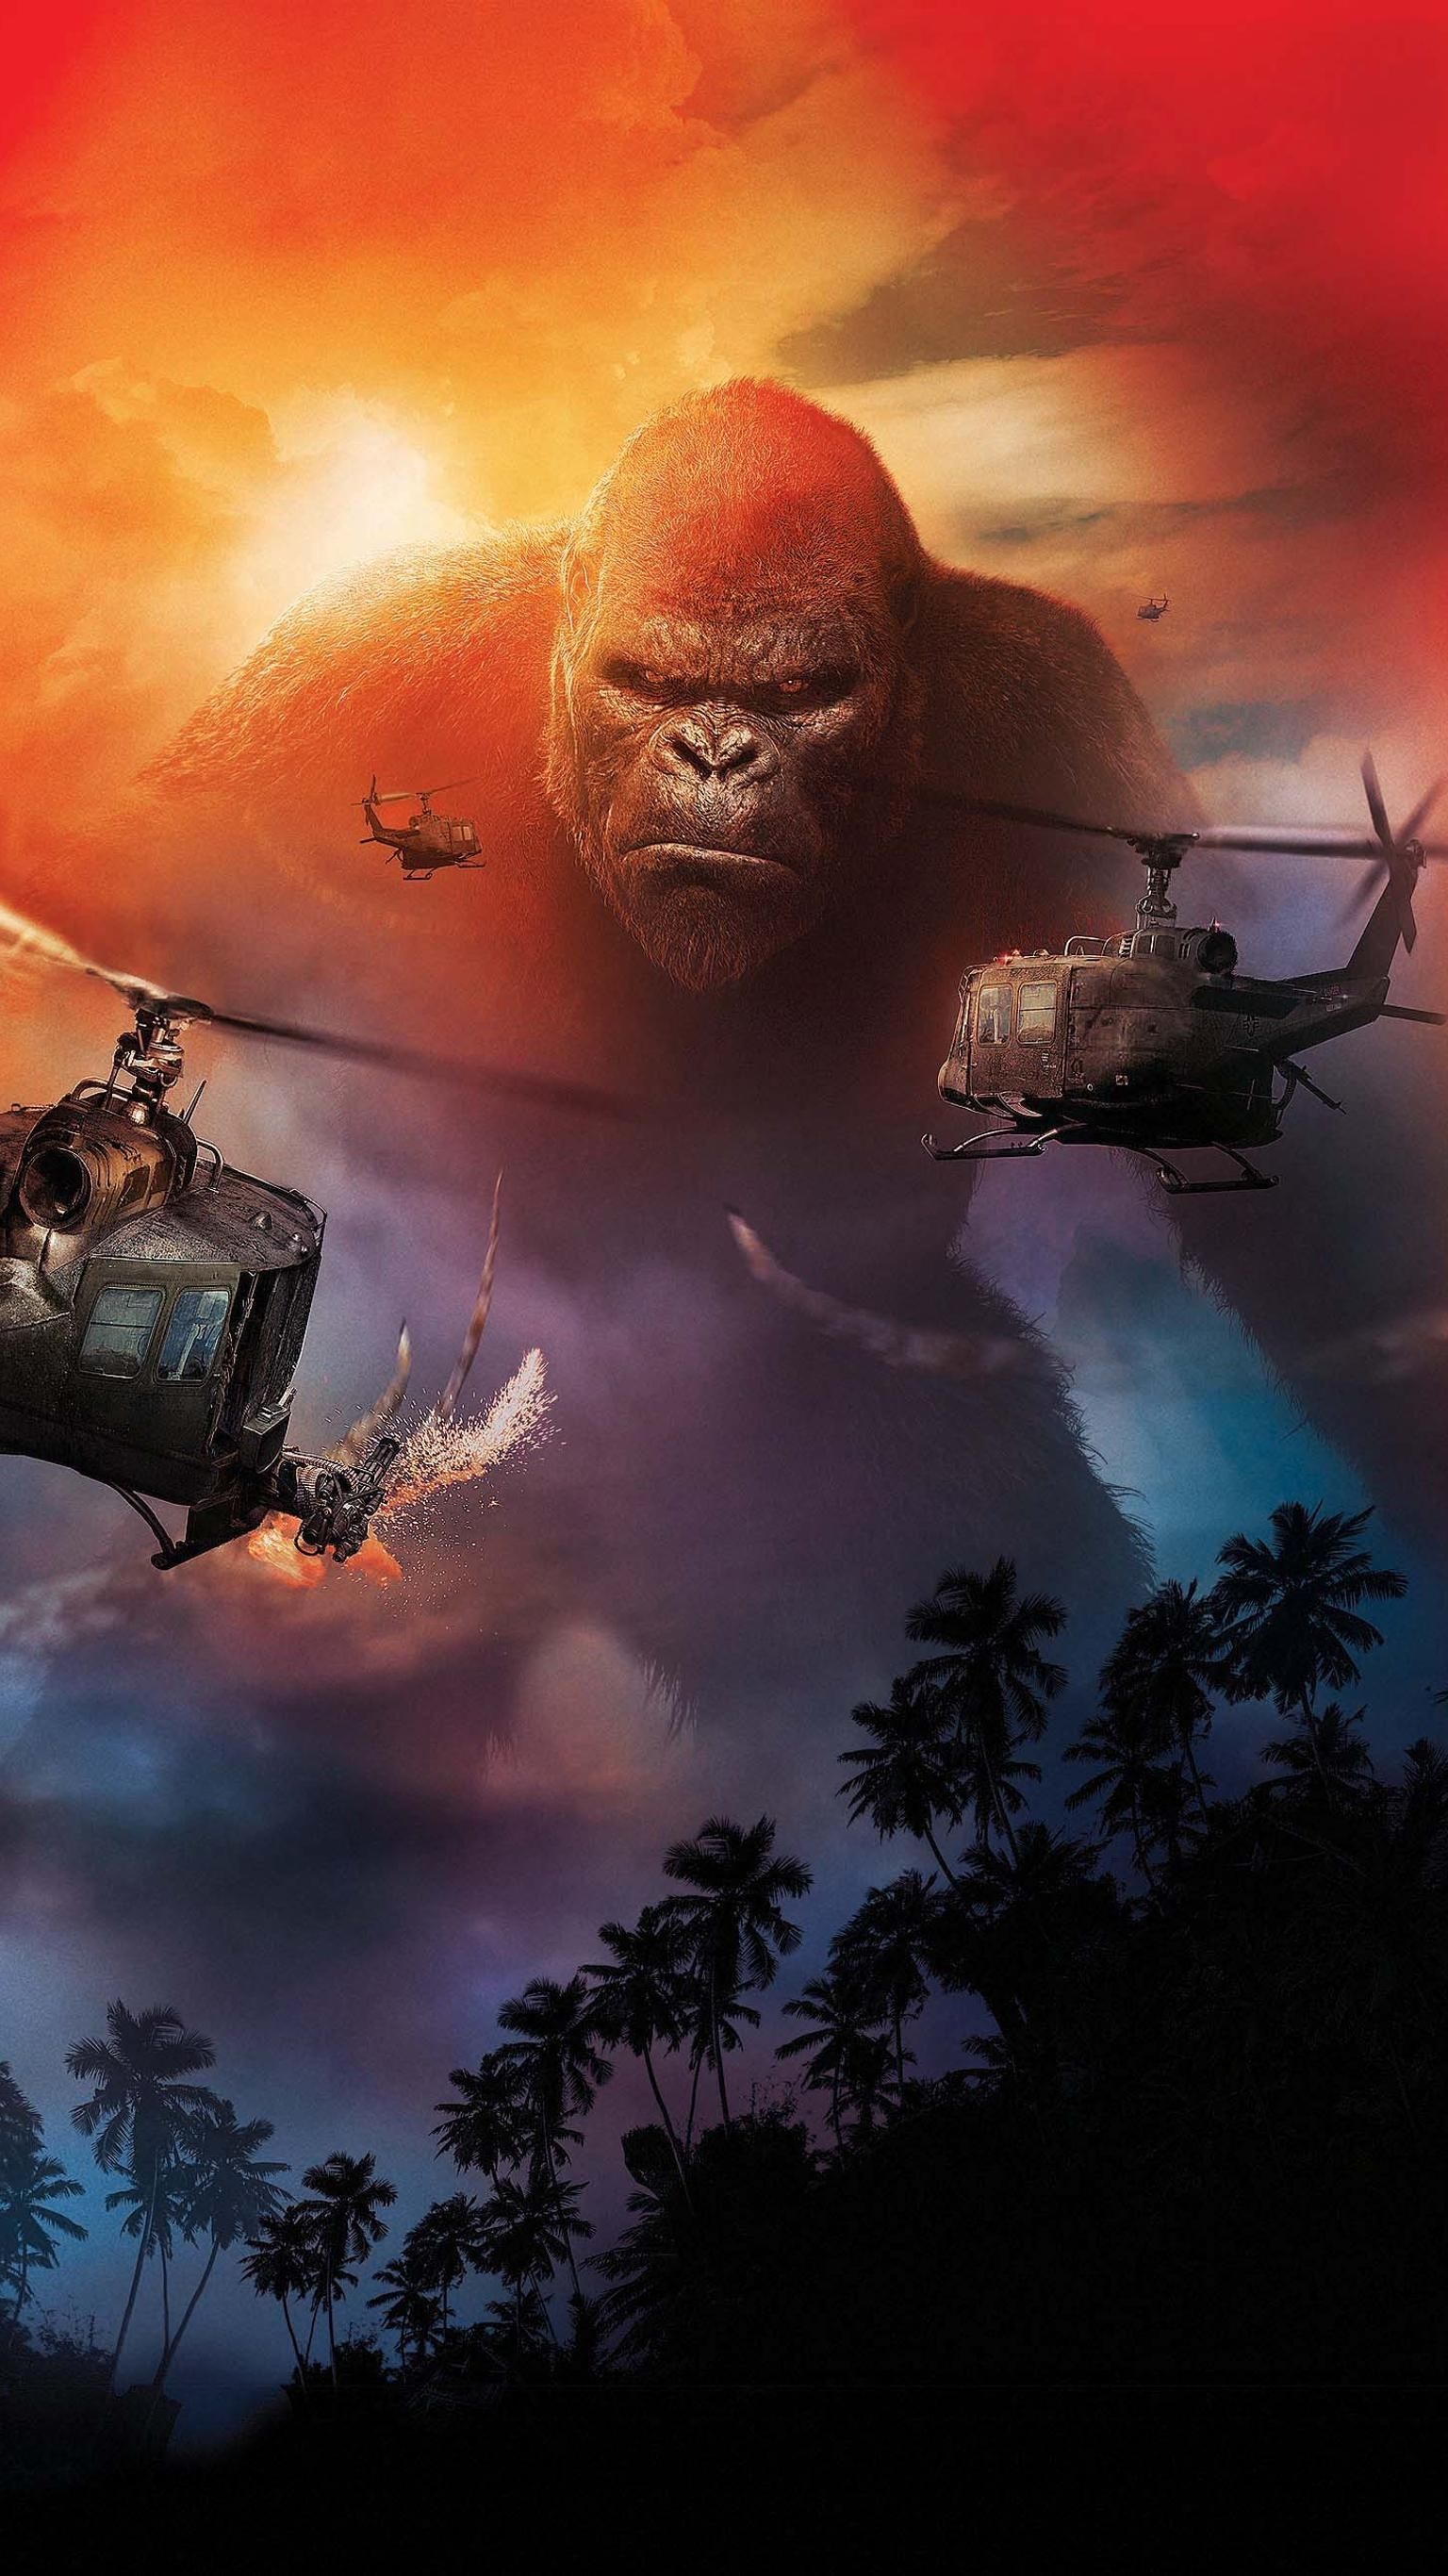 King Kong: Design in "Skull Island" was influenced by the original 1933 film, with a more gorilla-like appearance. 1540x2740 HD Background.